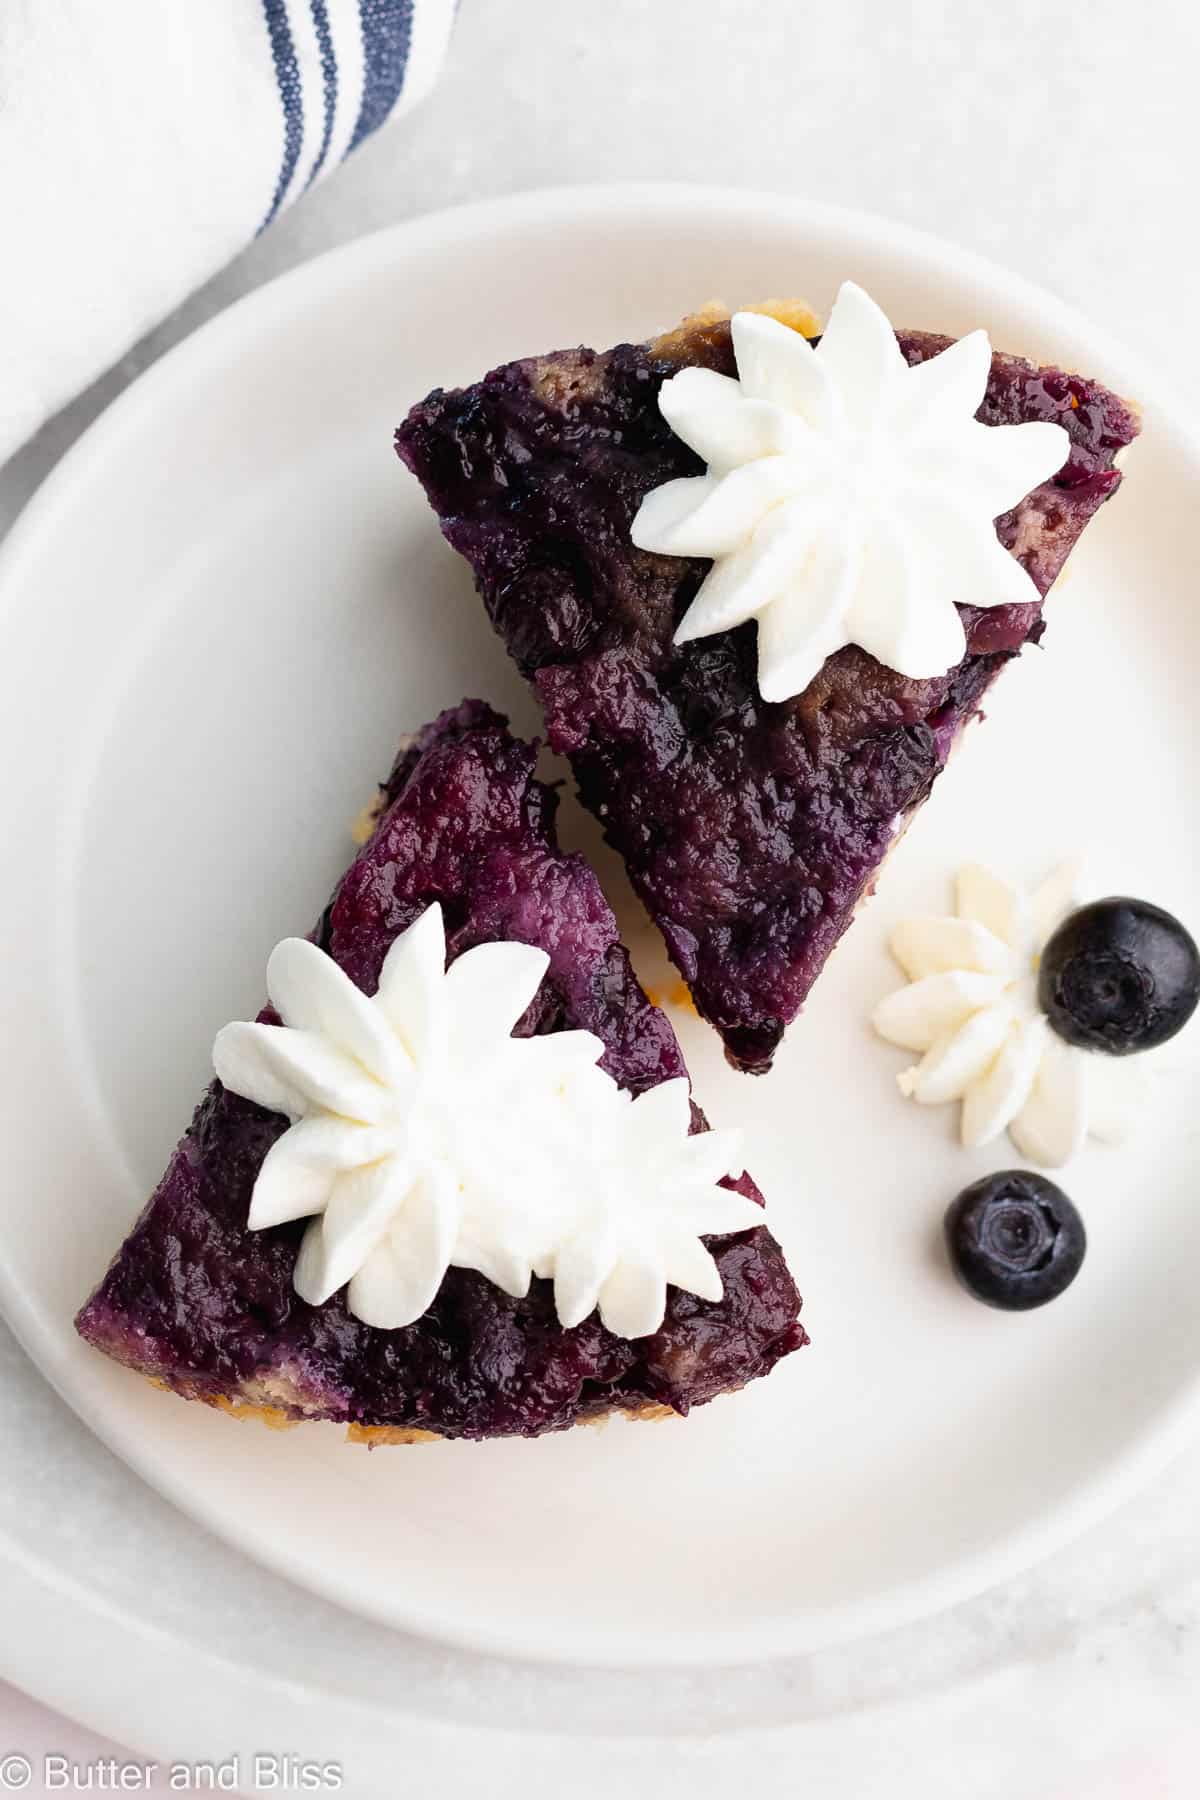 Jammy blueberries an whipped cream stars on top of two small slices of upside down cake.